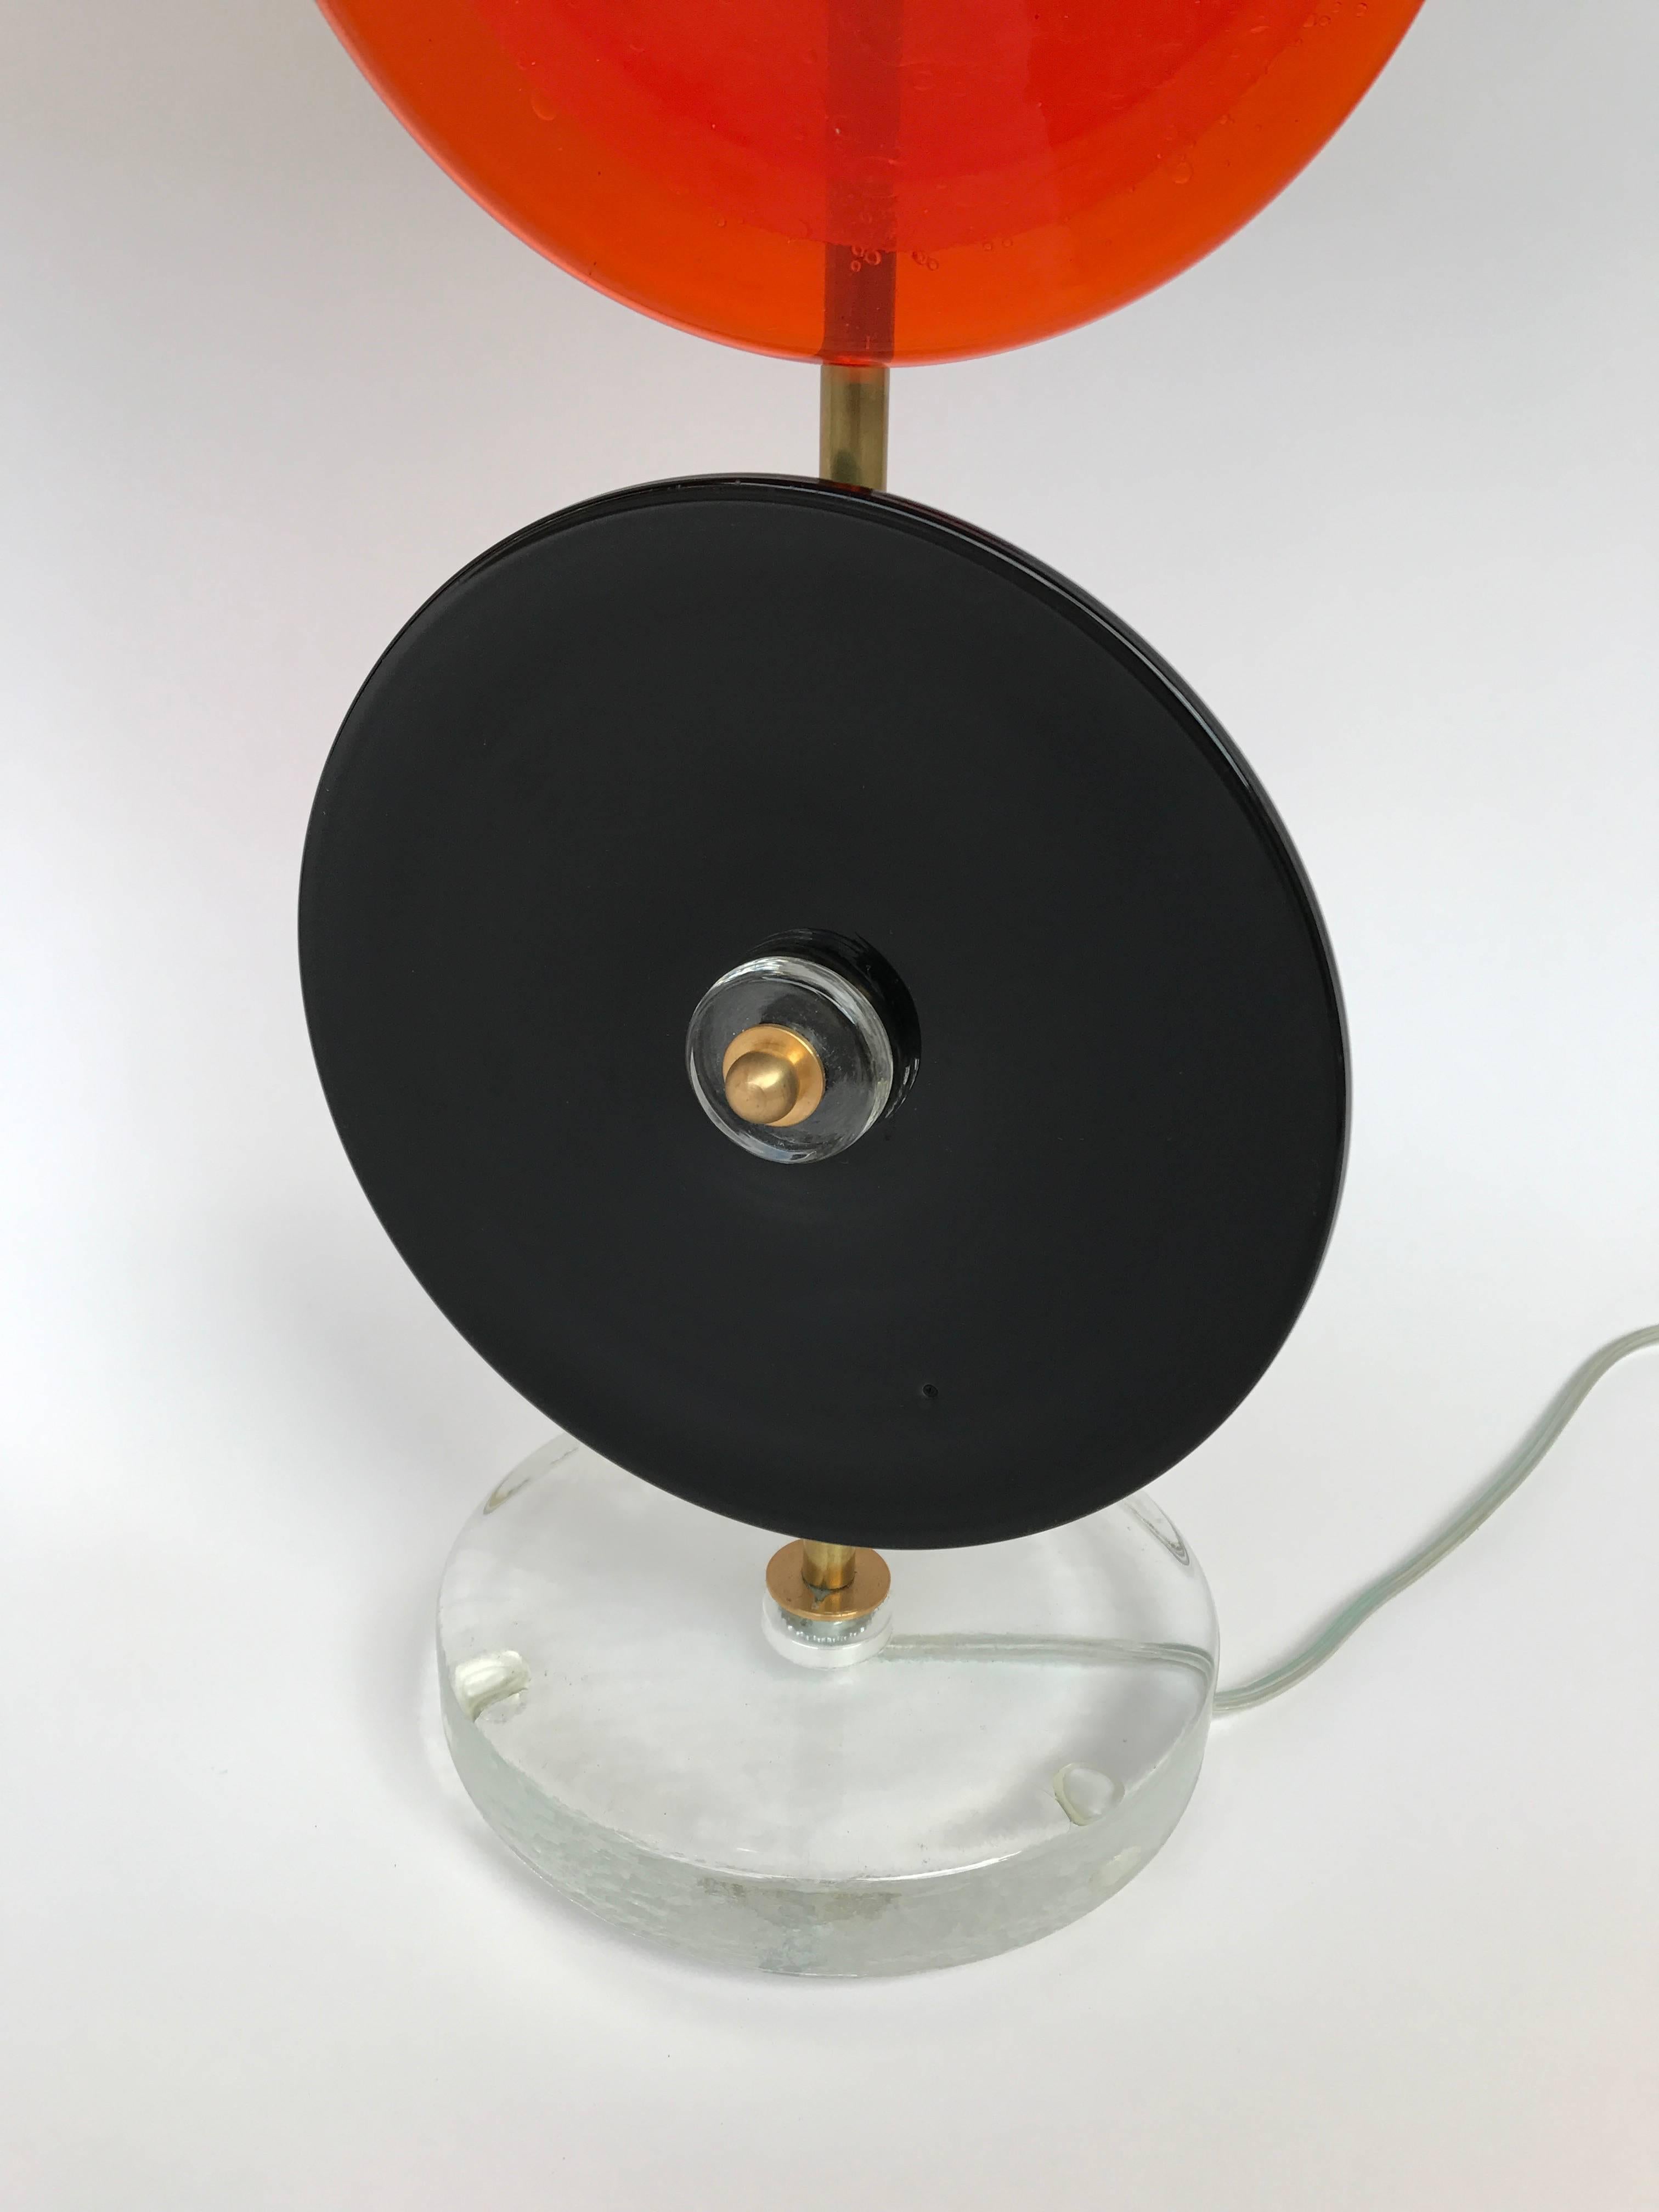 Contemporary pair of table or bedside lamps, red and black Murano pressed glass disc, brass structure. Work in the style of Vistosi, Venini, Mazzega, La Murrina, Aldo Carlo Nason.

Demo shades are not included. Measurements indicated with demo shades